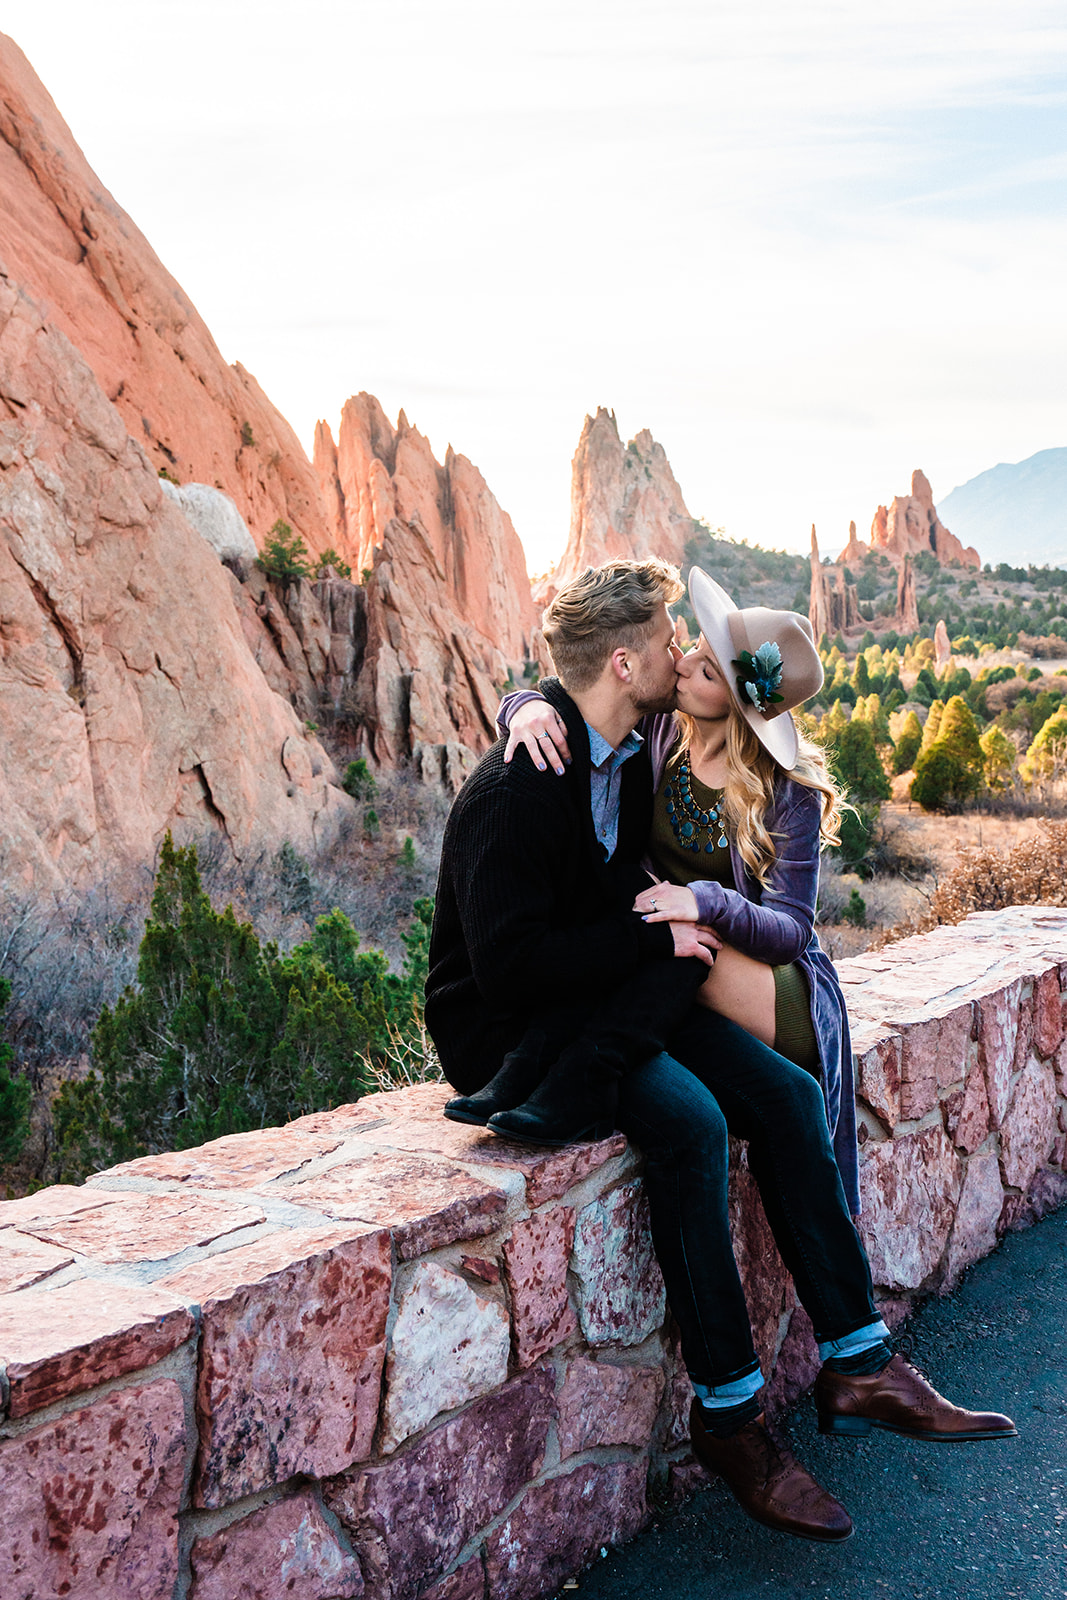 Newly engaged coupe kissing at the Garden of the Gods